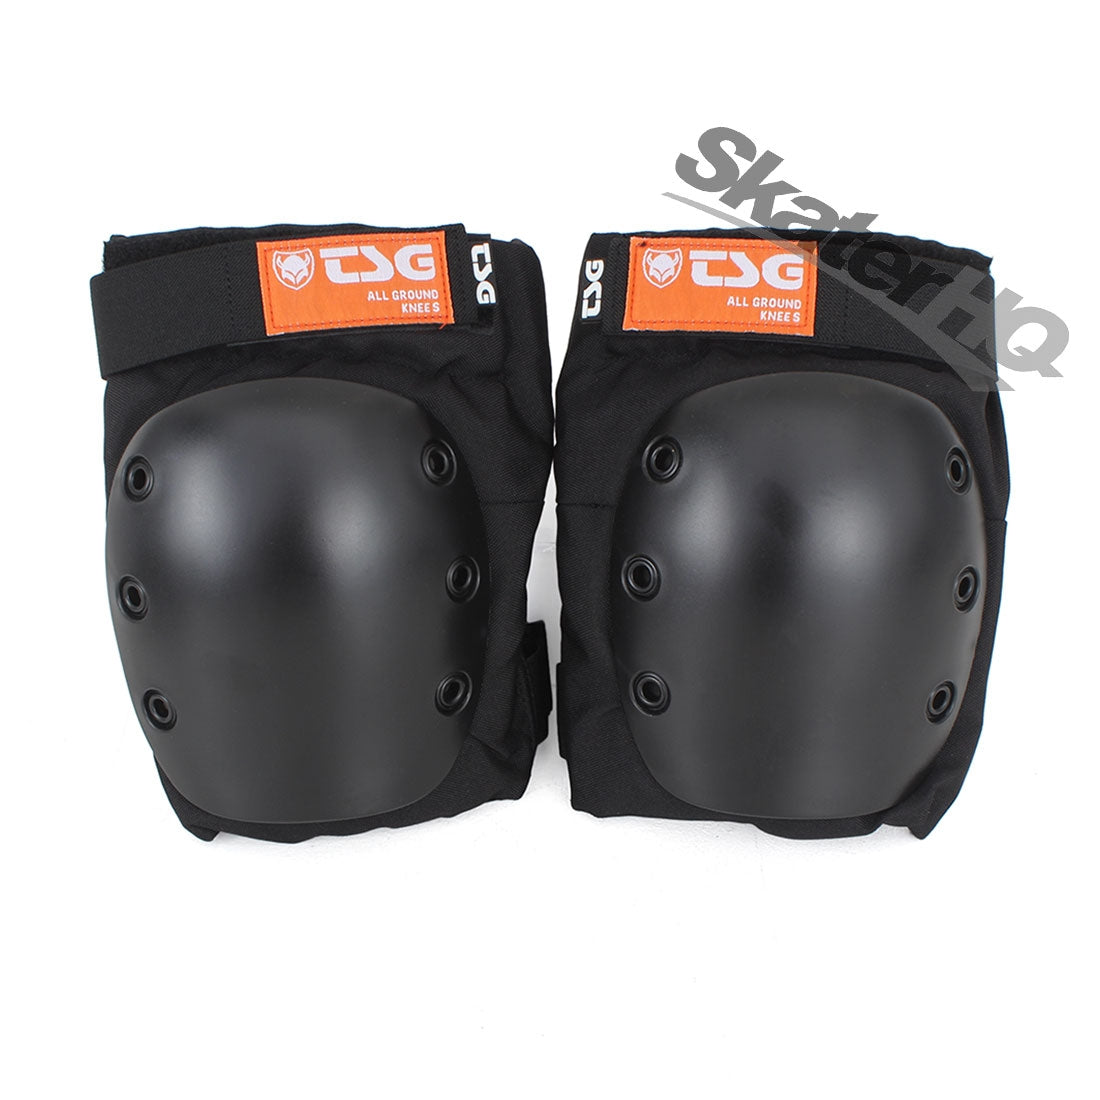 TSG All Ground Kneepads - Small Protective Gear